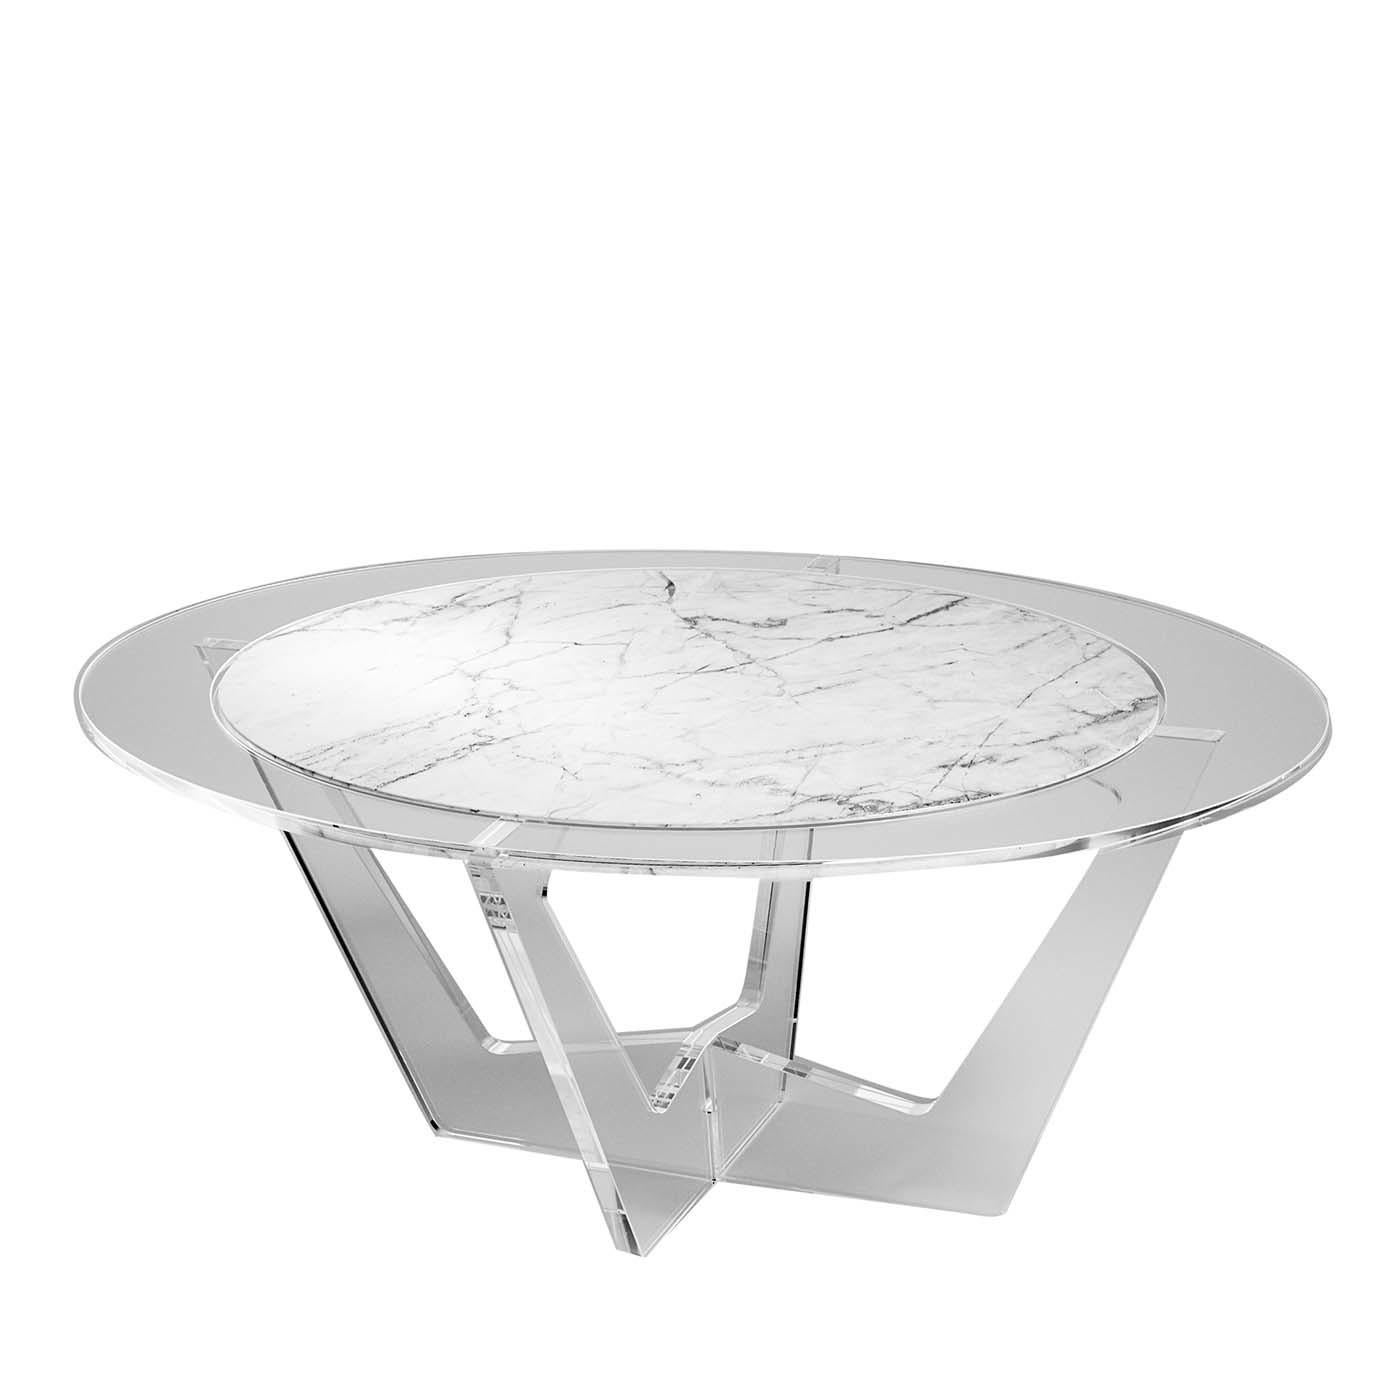 Italian Hac Oval Coffee Table with White Carrara Marble Top by Madea Milano